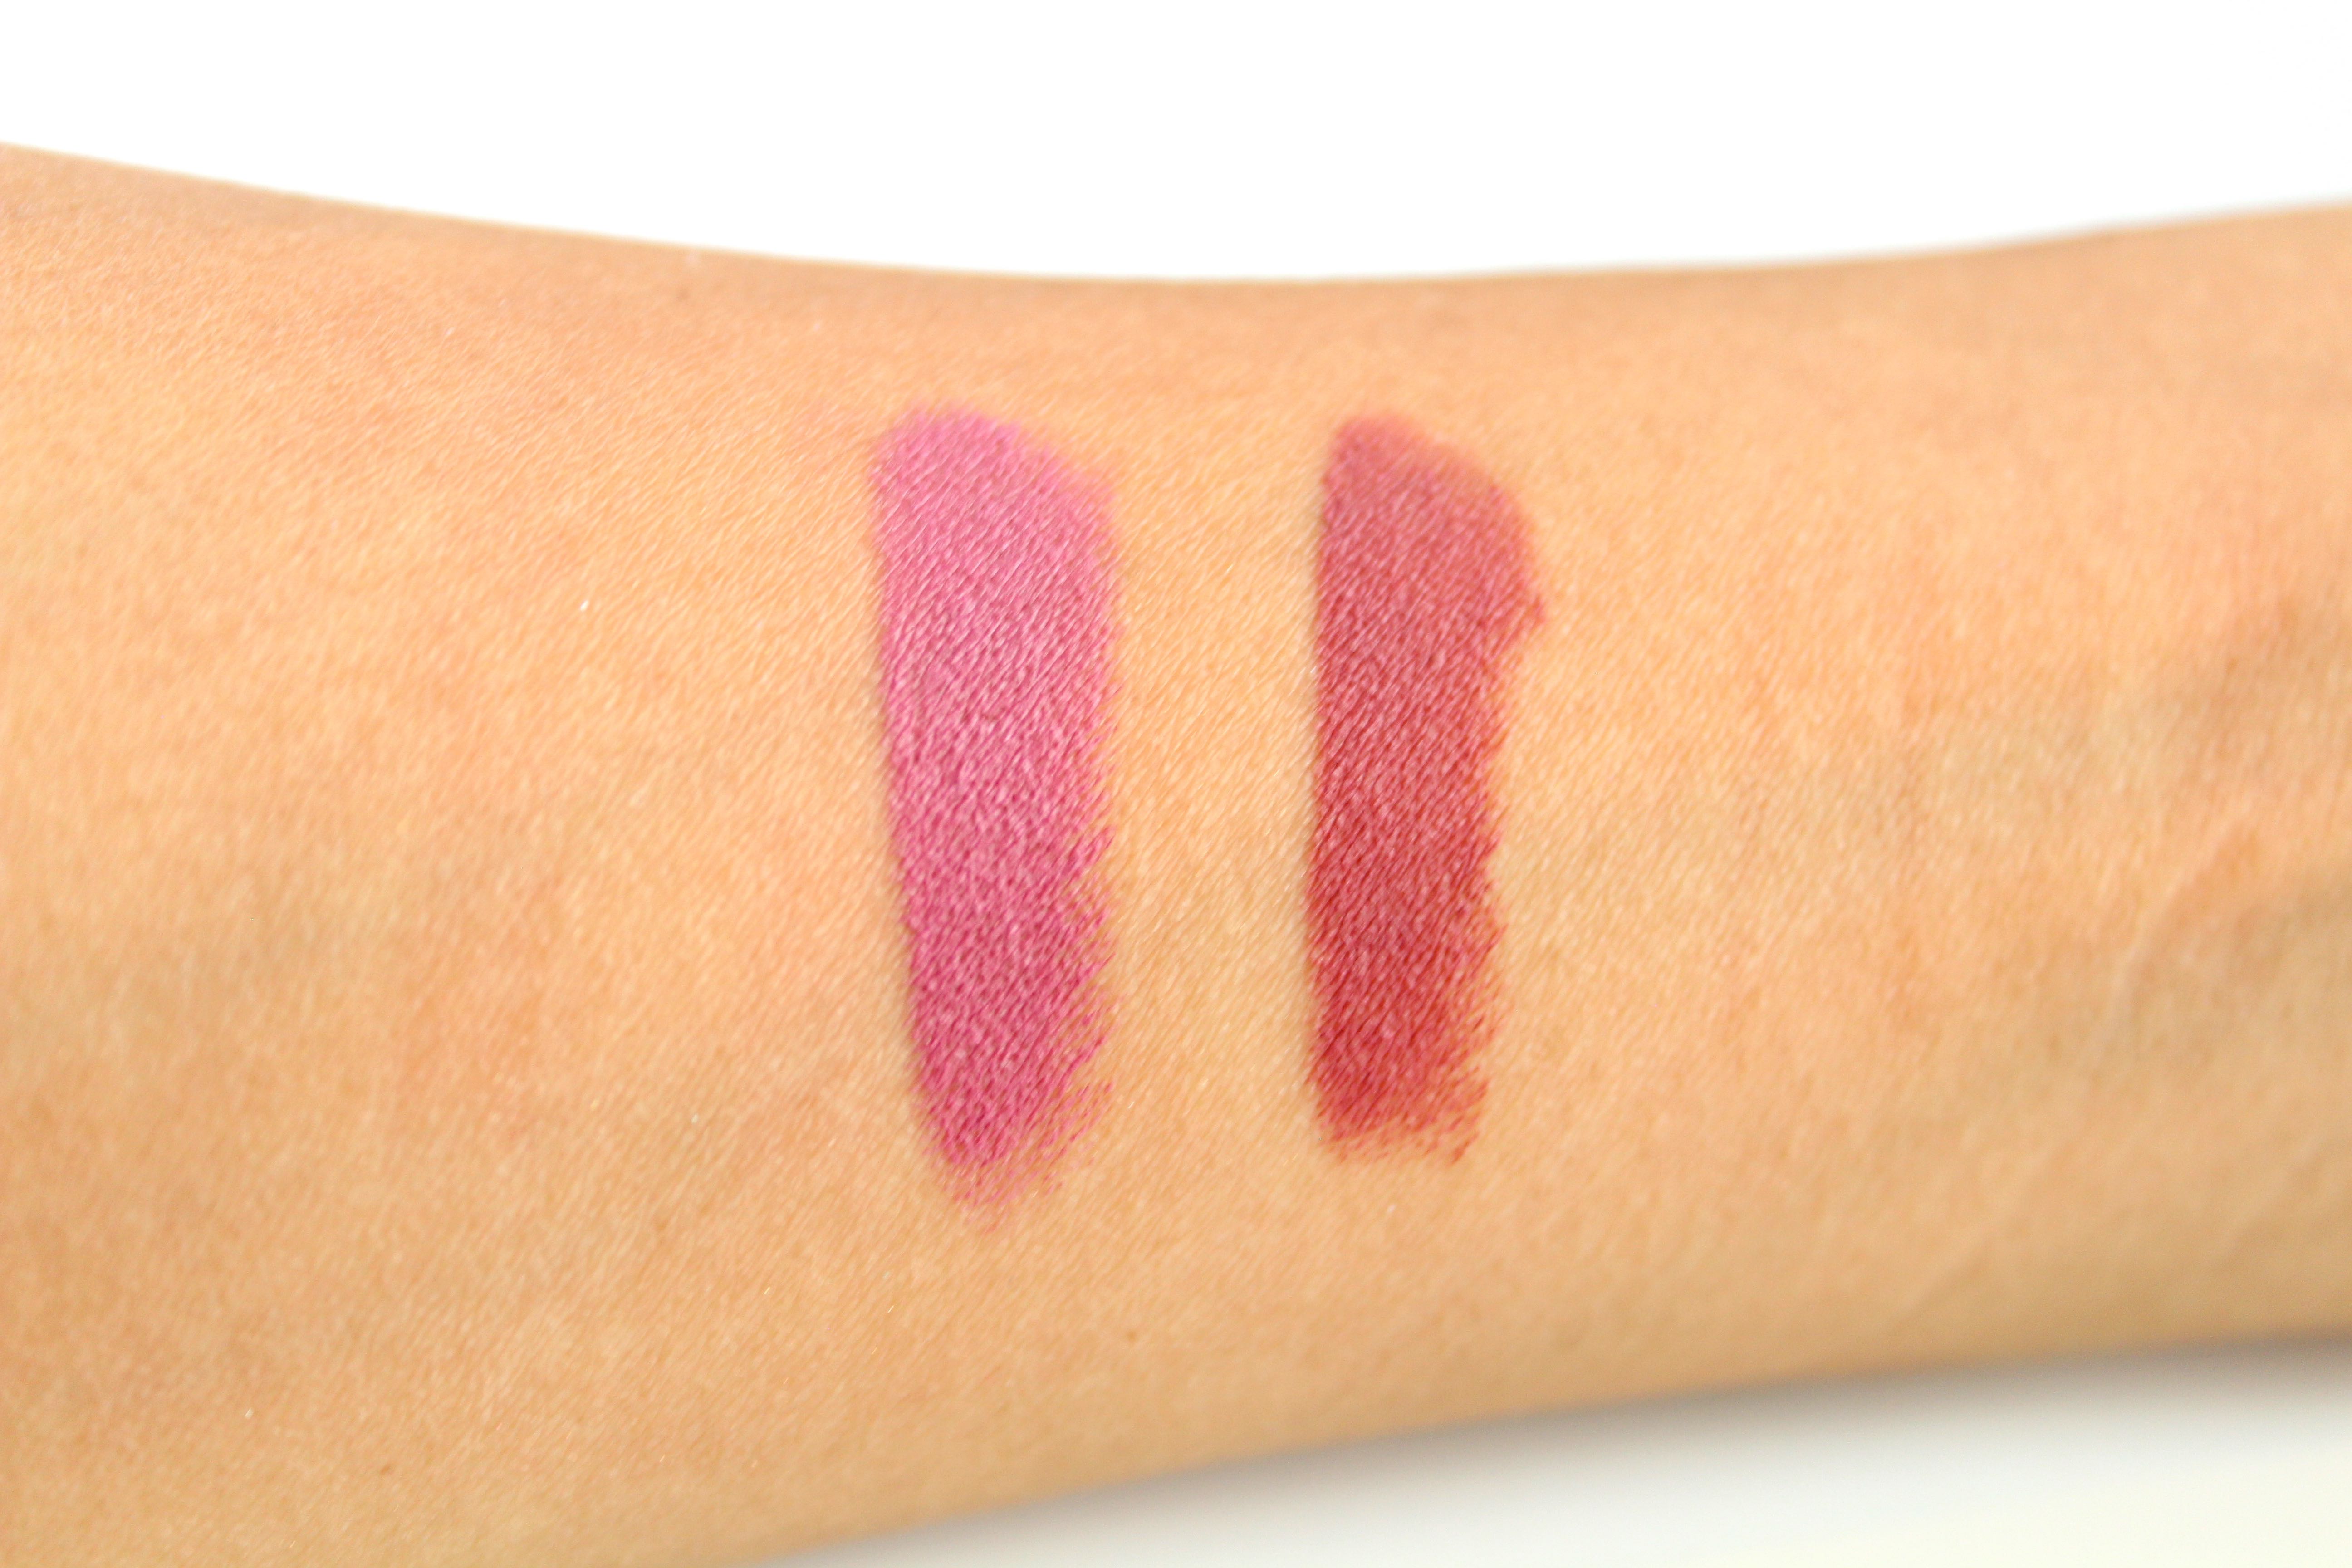 Maybelline Colour Sensation Creamy Matte Lipsticks Review and Swatches by Face Made Up